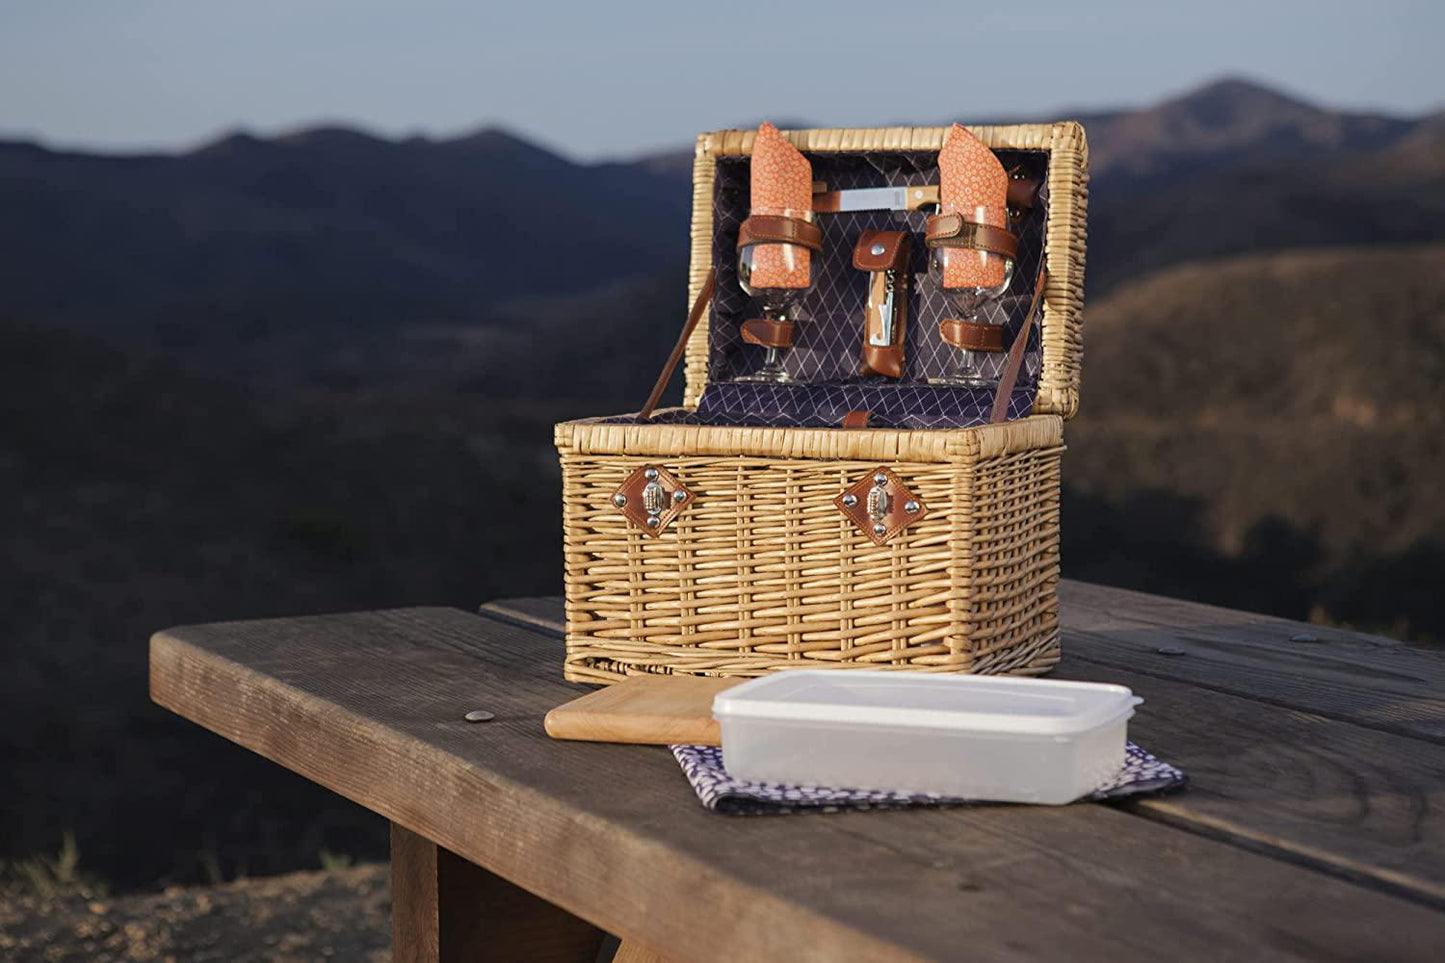 PICNIC TIME - Napa Wine and Cheese Picnic Basket for 2 - Wine Picnic Basket Set - Wine Basket with Wine Glasses and Cheese Board, (Adeline Collection